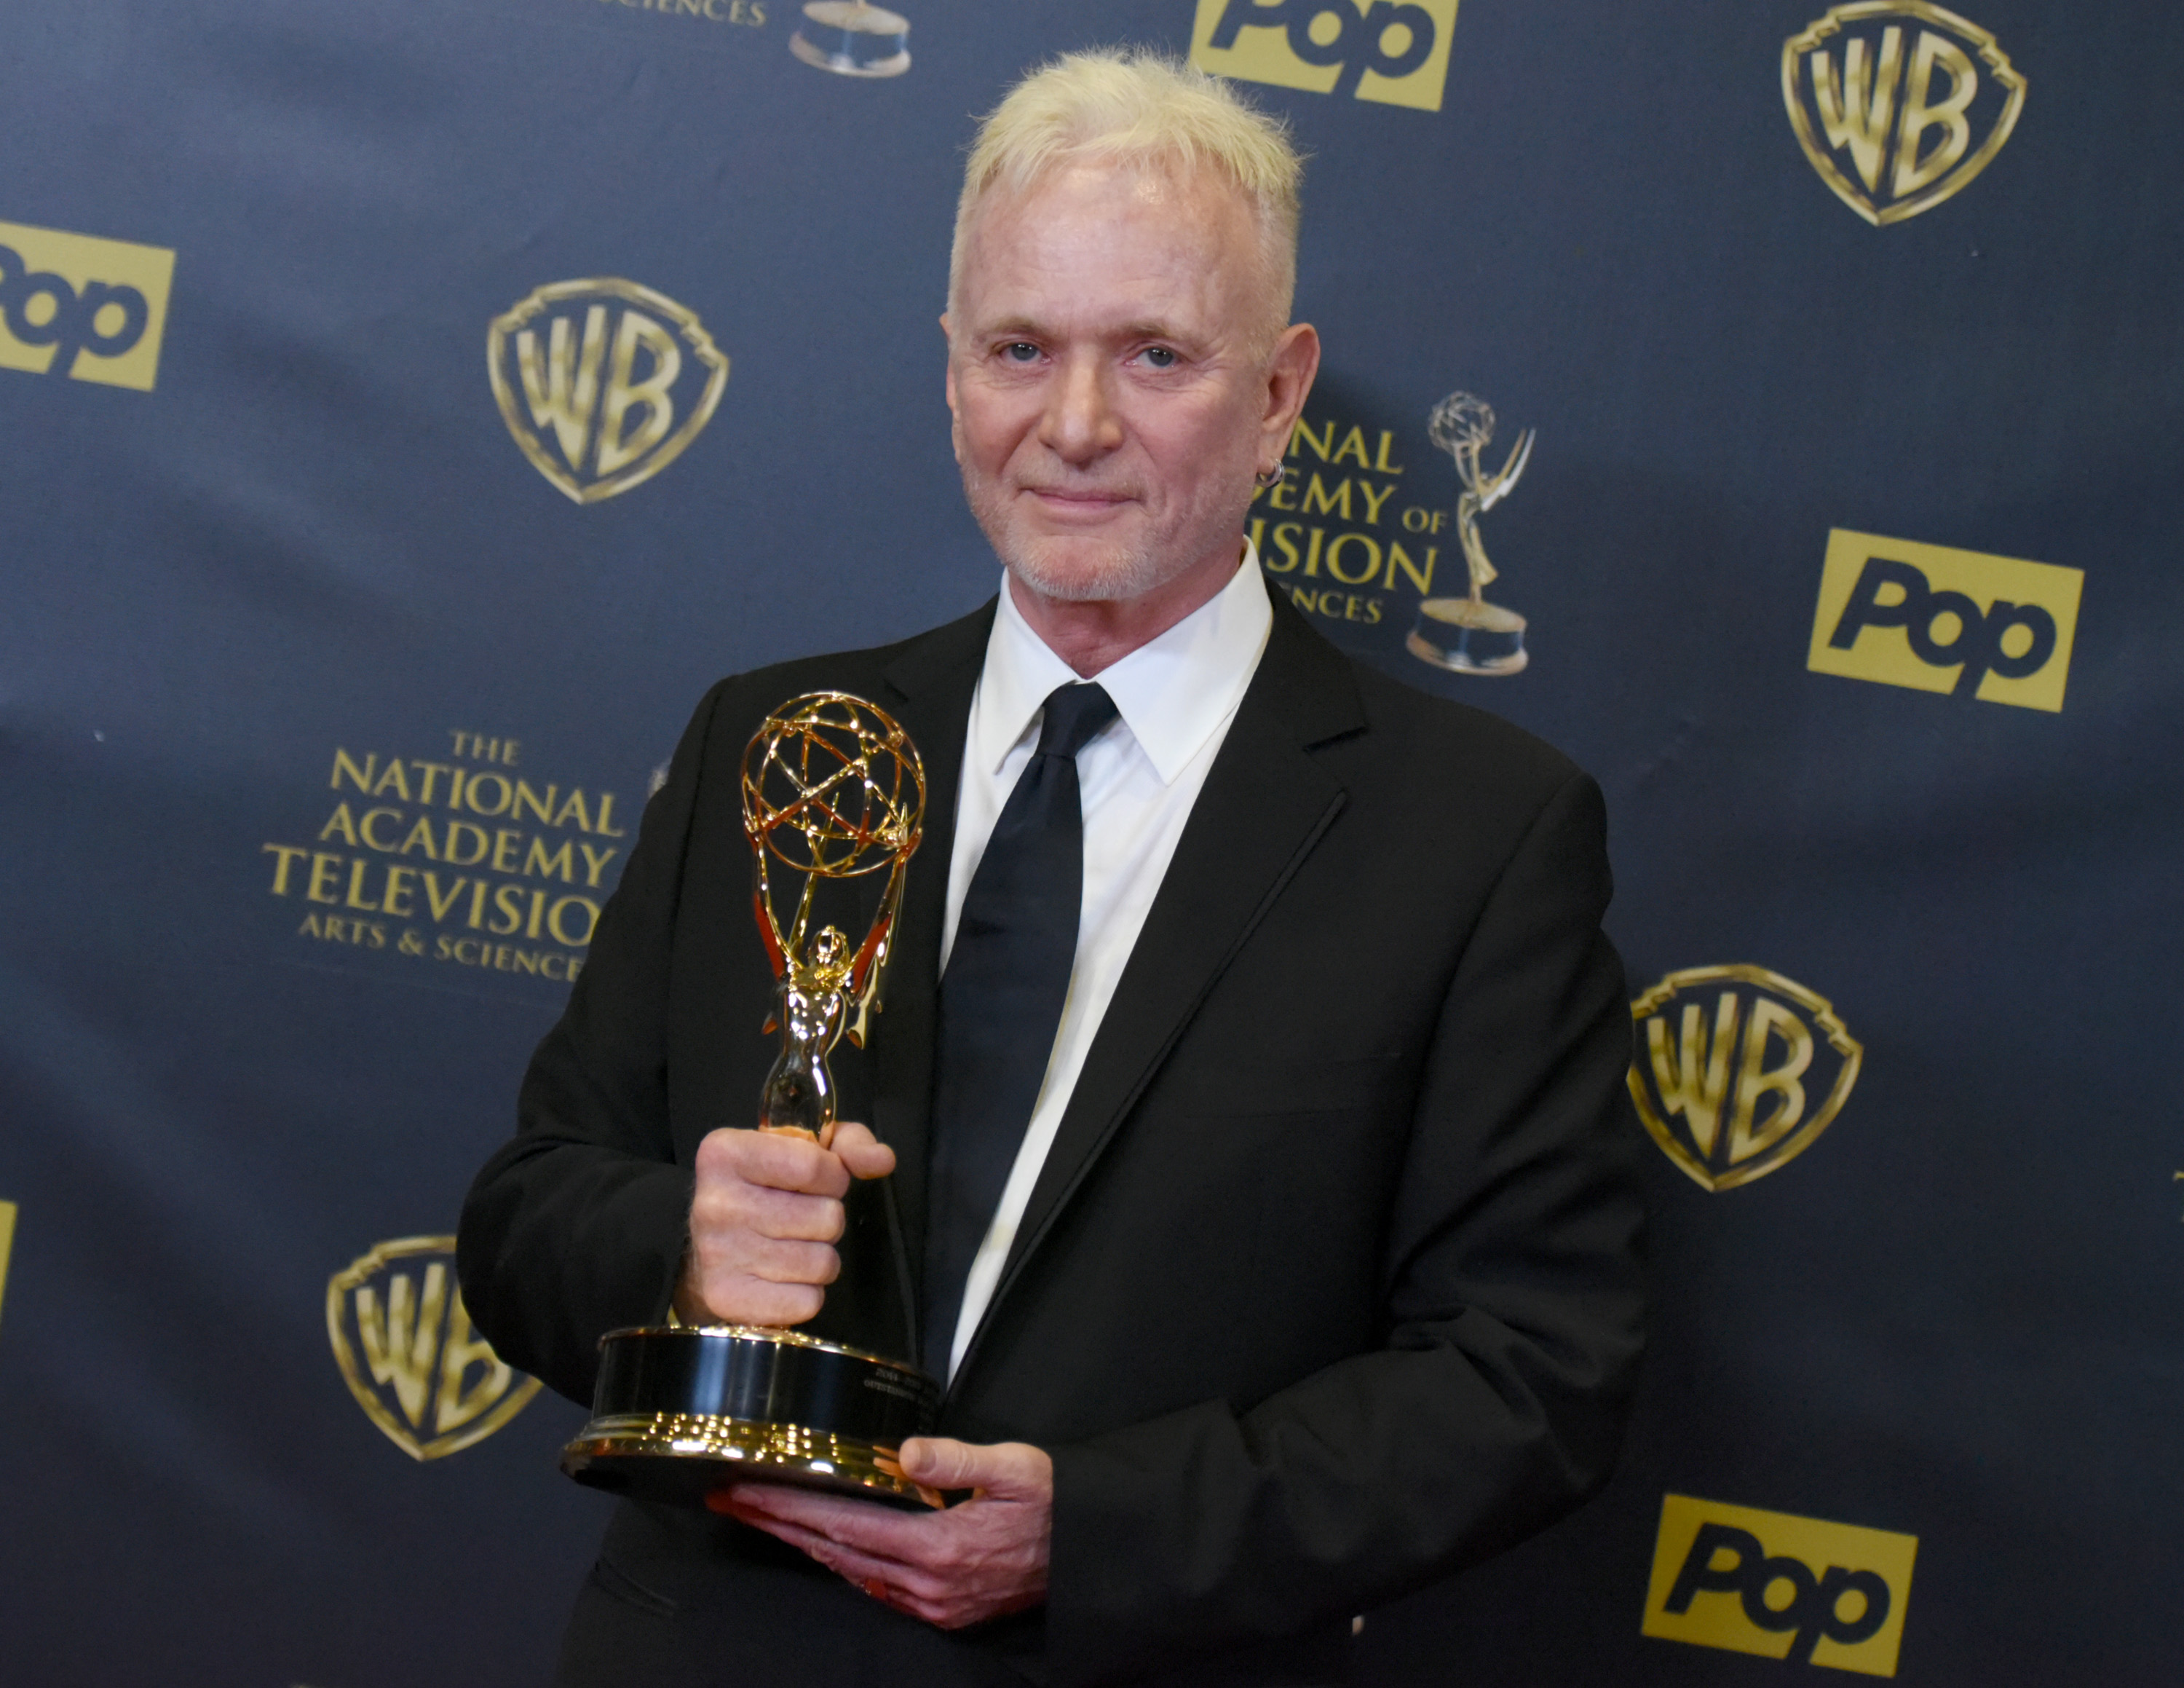 Anthony Geary with the award for outstanding lead actor in a drama series at the 42nd annual Daytime Emmy Awards in 2015. (Richard Shotwell—Invision/AP)